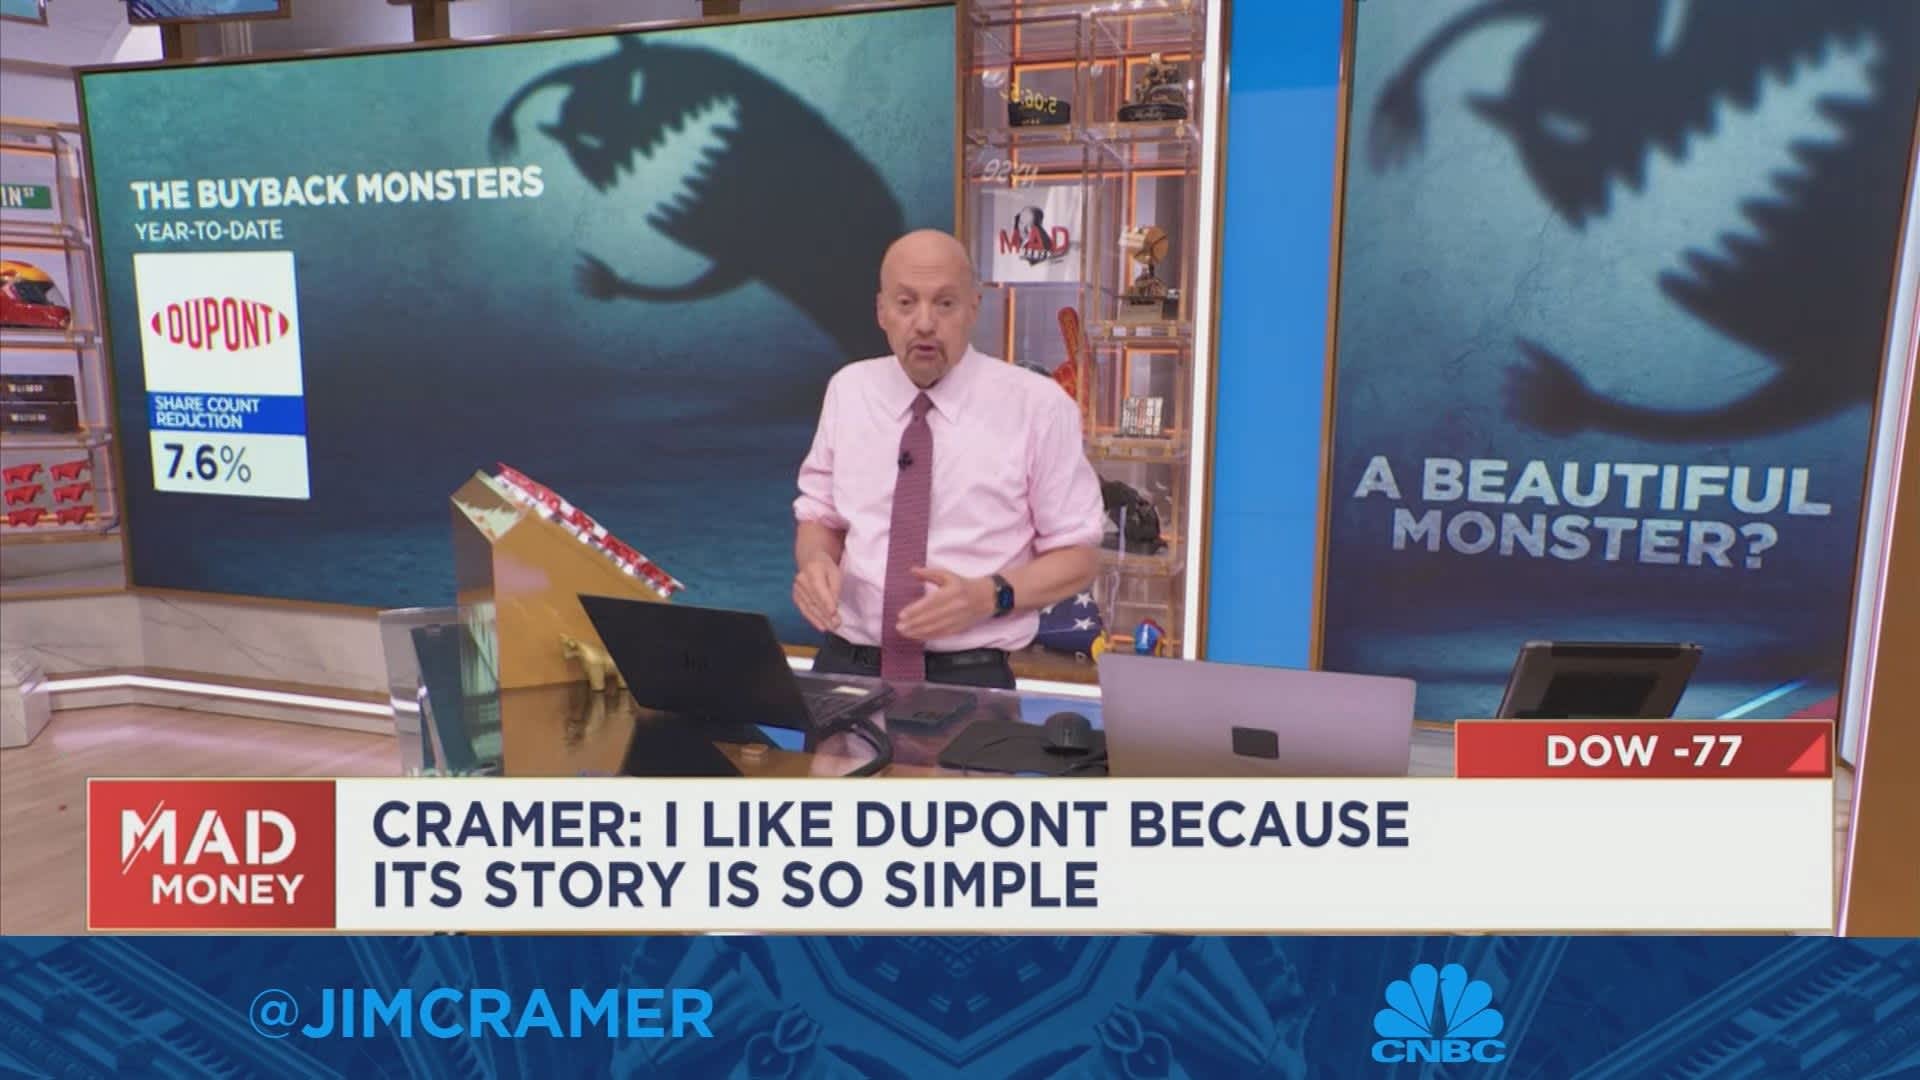 I like DuPont because its story is simple, says Jim Cramer